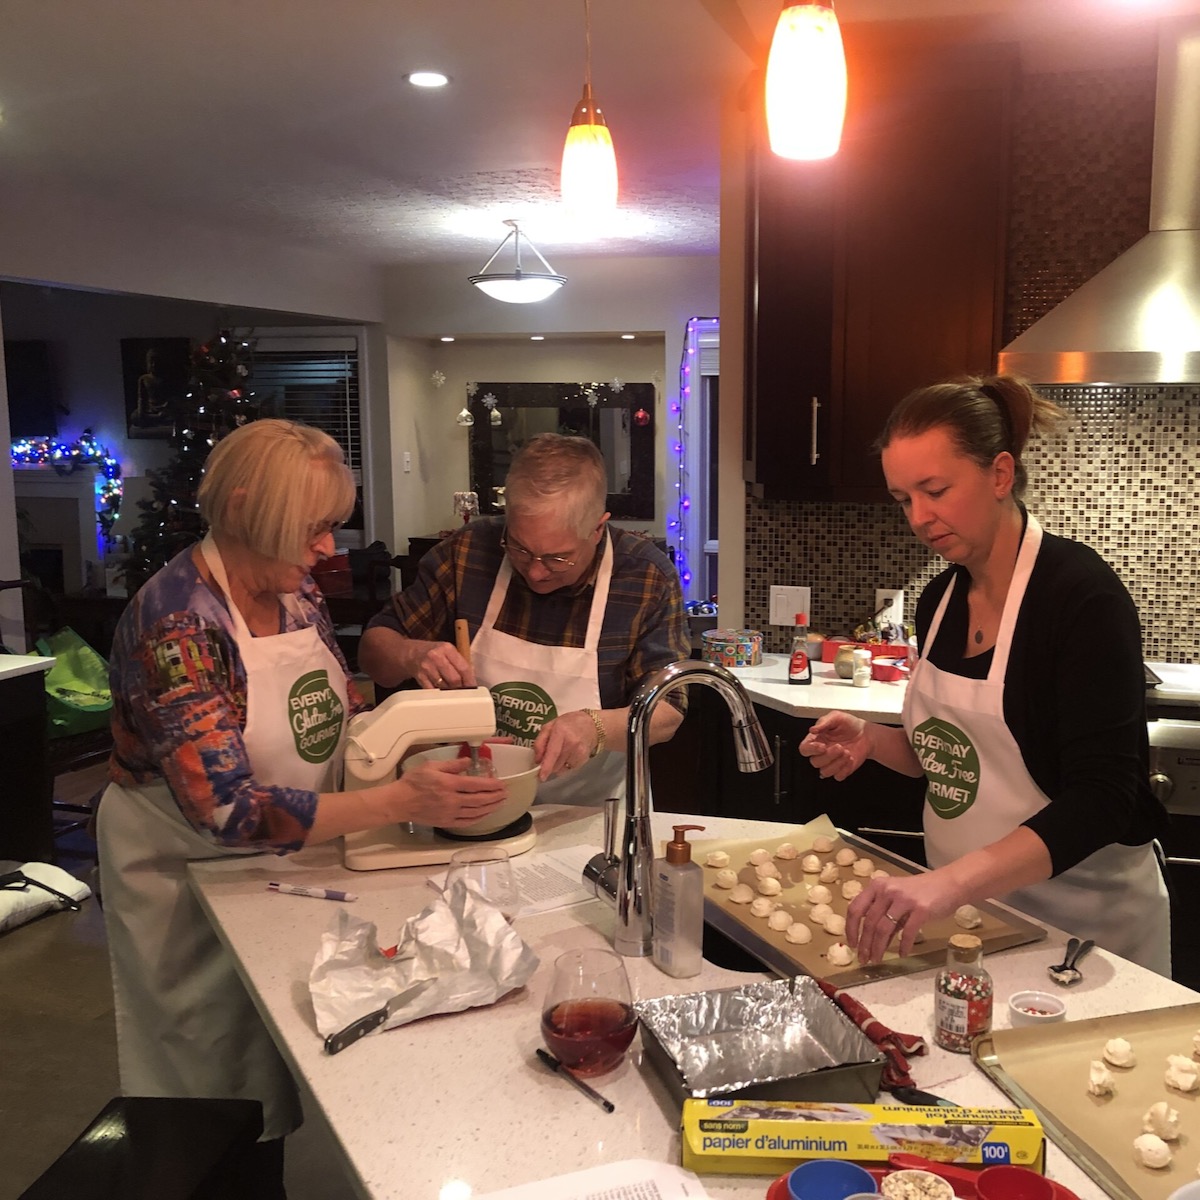 Three ladies in the kitchen, two at the stand mixer and one adding cherries to the shortbread.